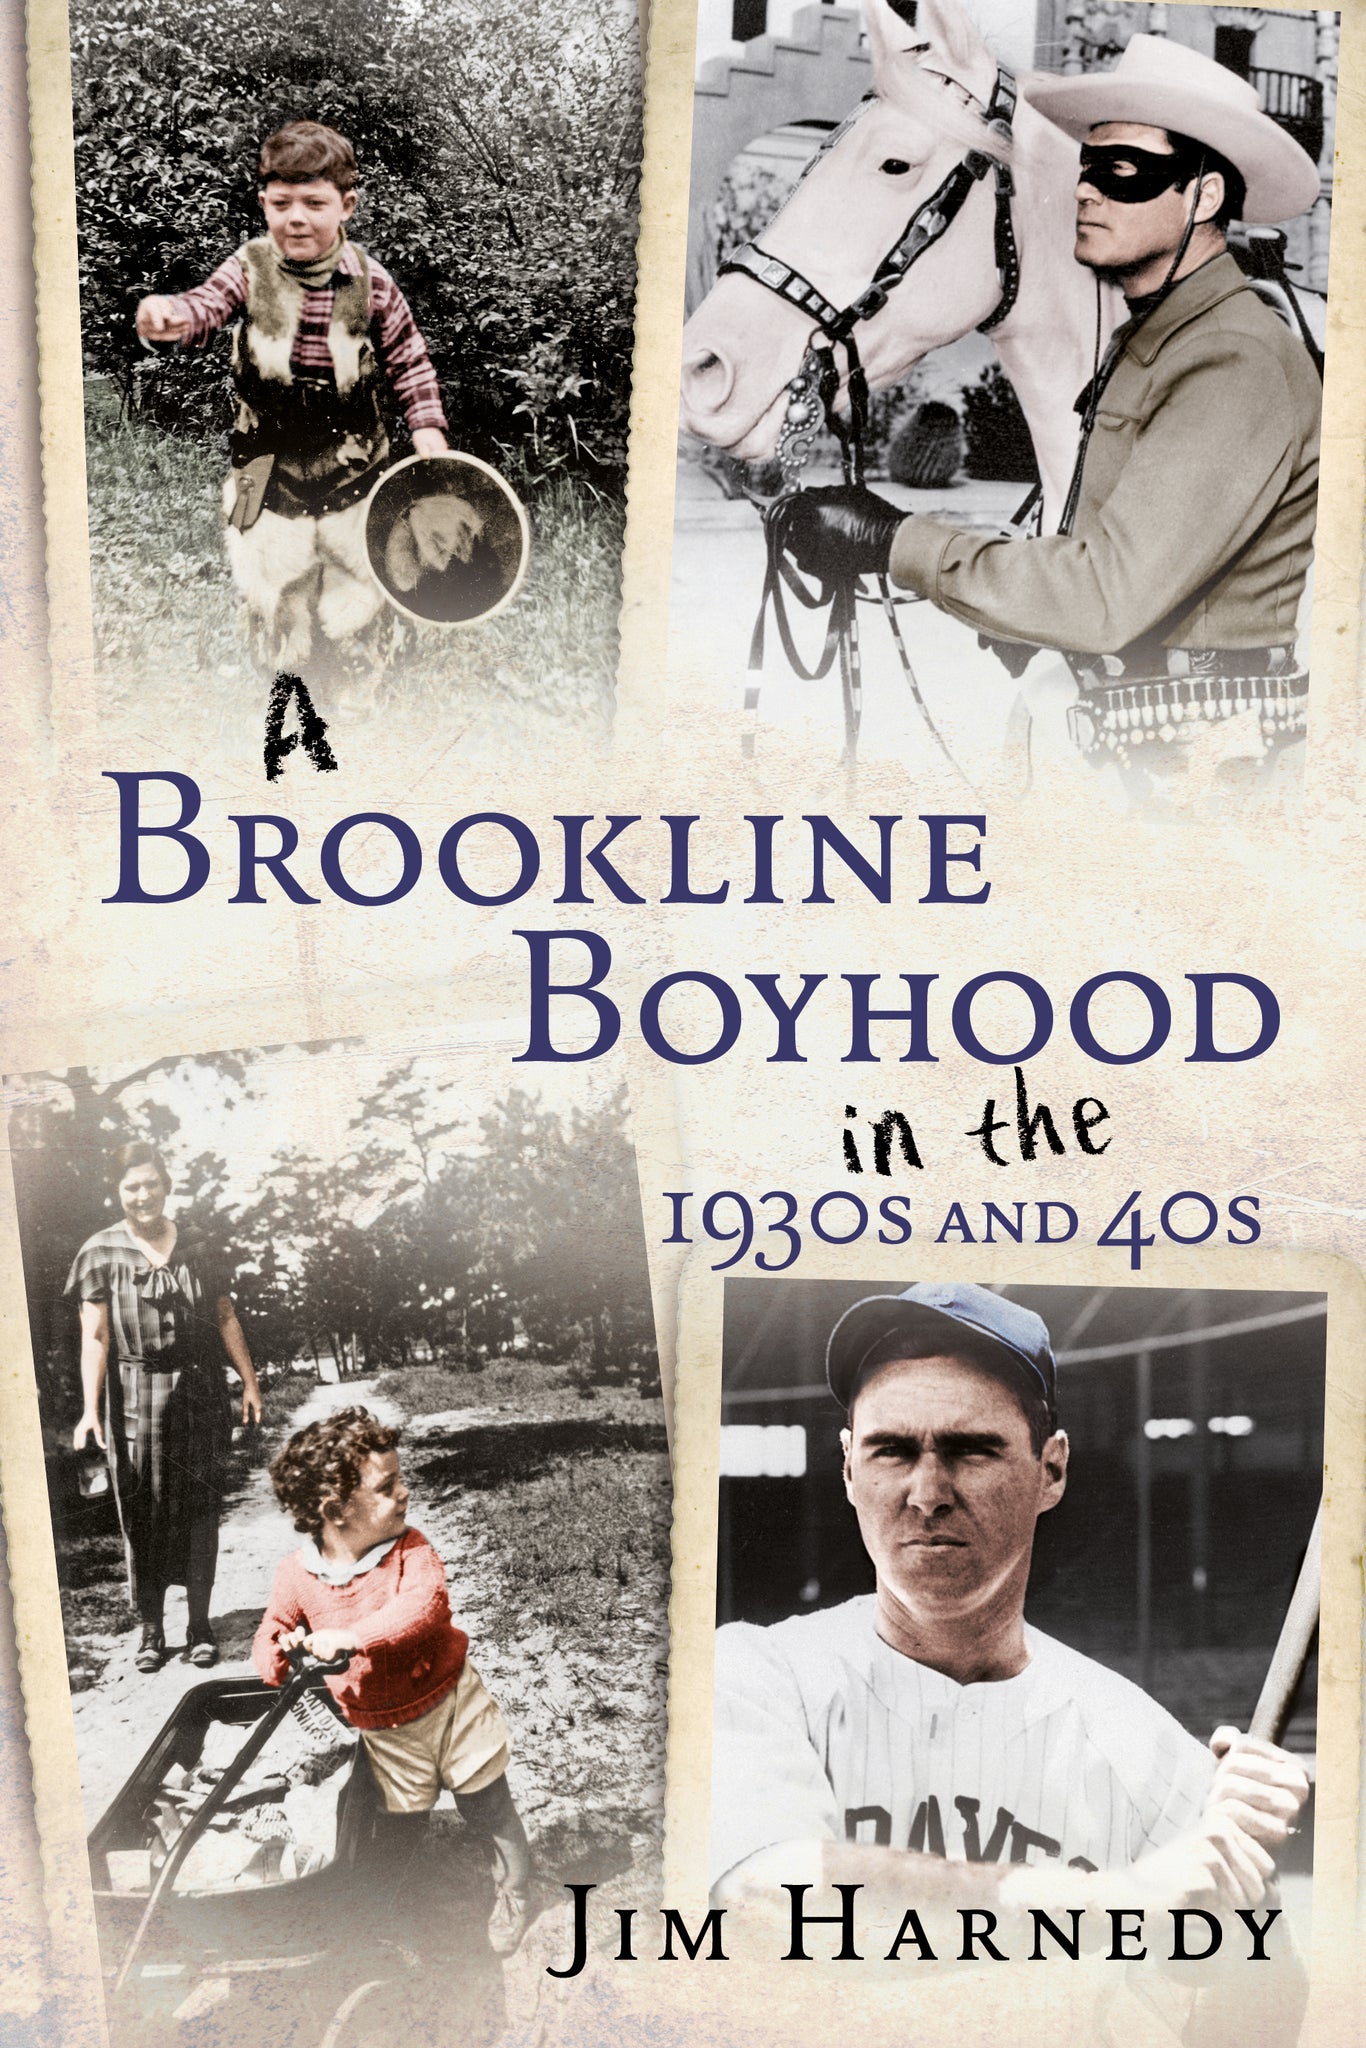 A Brookline Boyhood in the 1930s and 40s - available from Fonthill Media